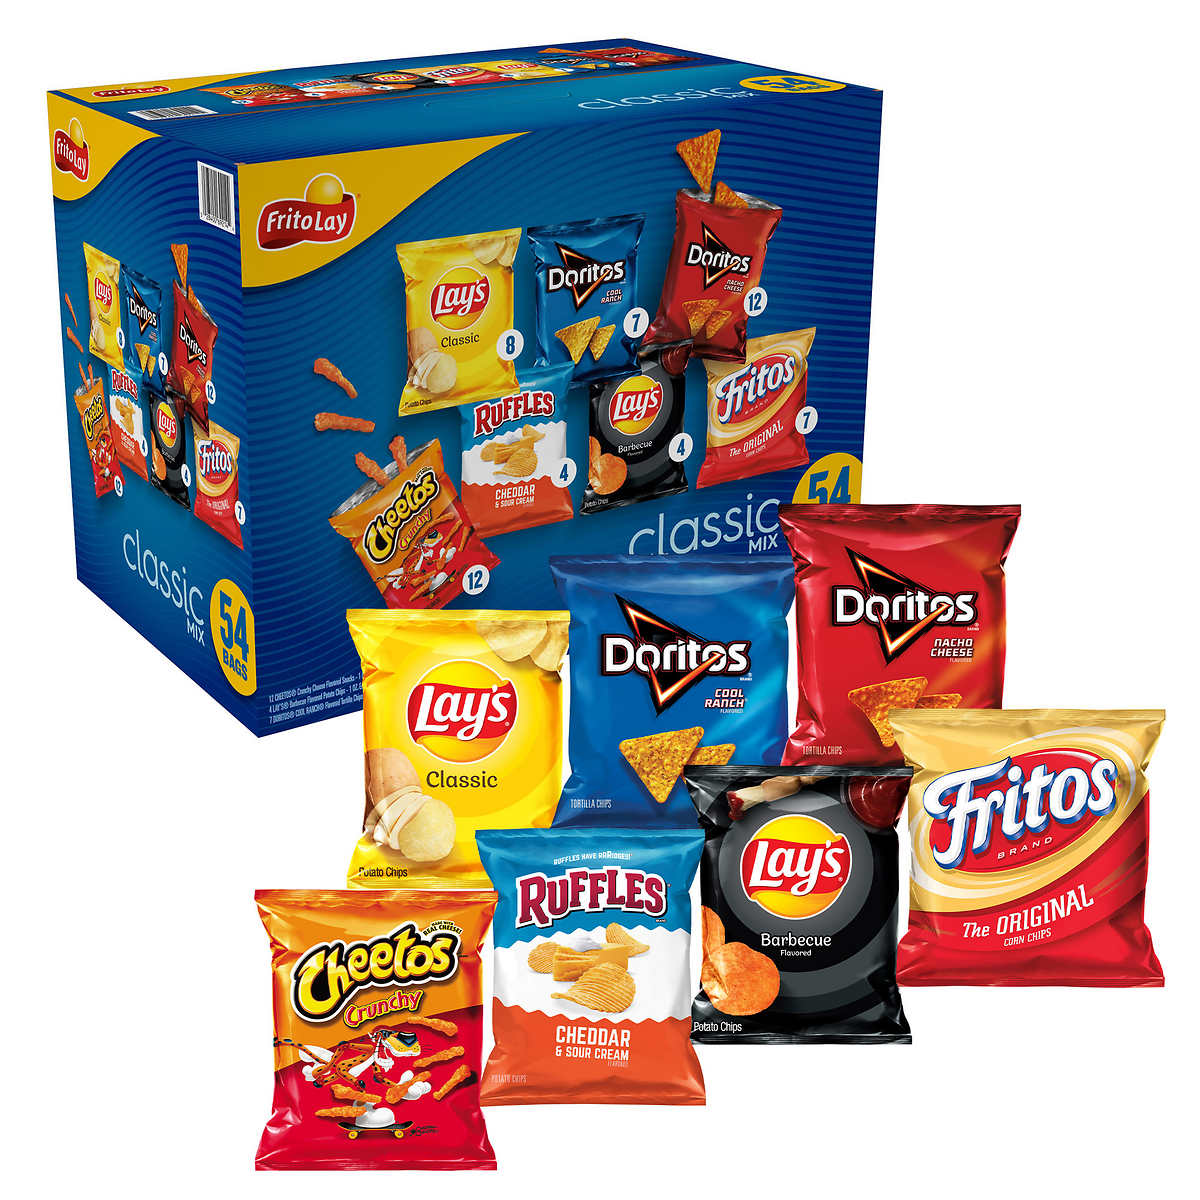  Frito-Lay Baked & Popped Mix Variety Pack, (Pack of